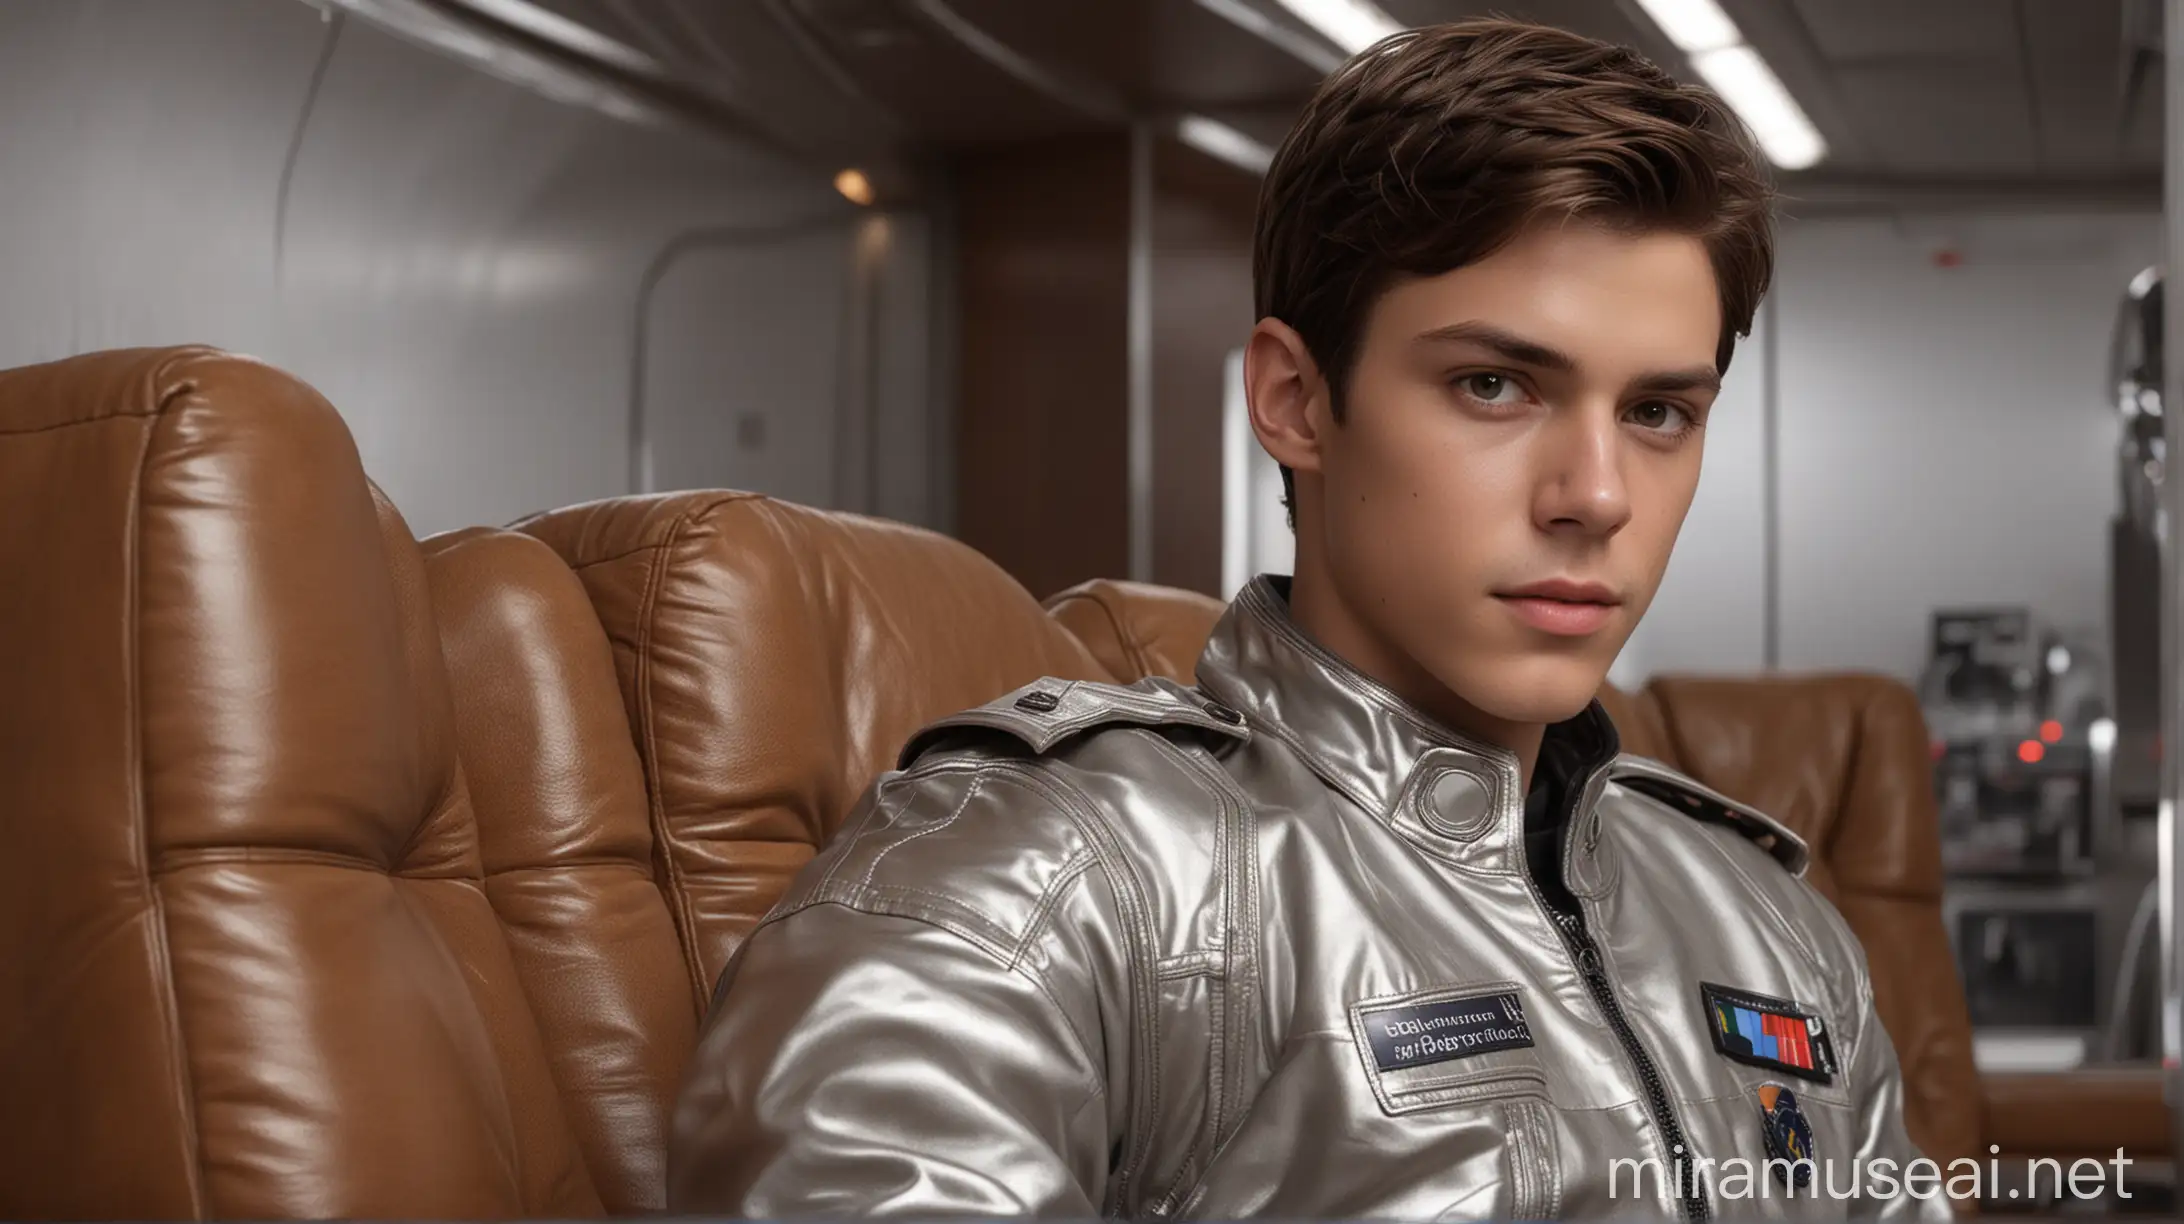 Three Young Men in Metallic Jackets on SciFi Starship Command Compartment